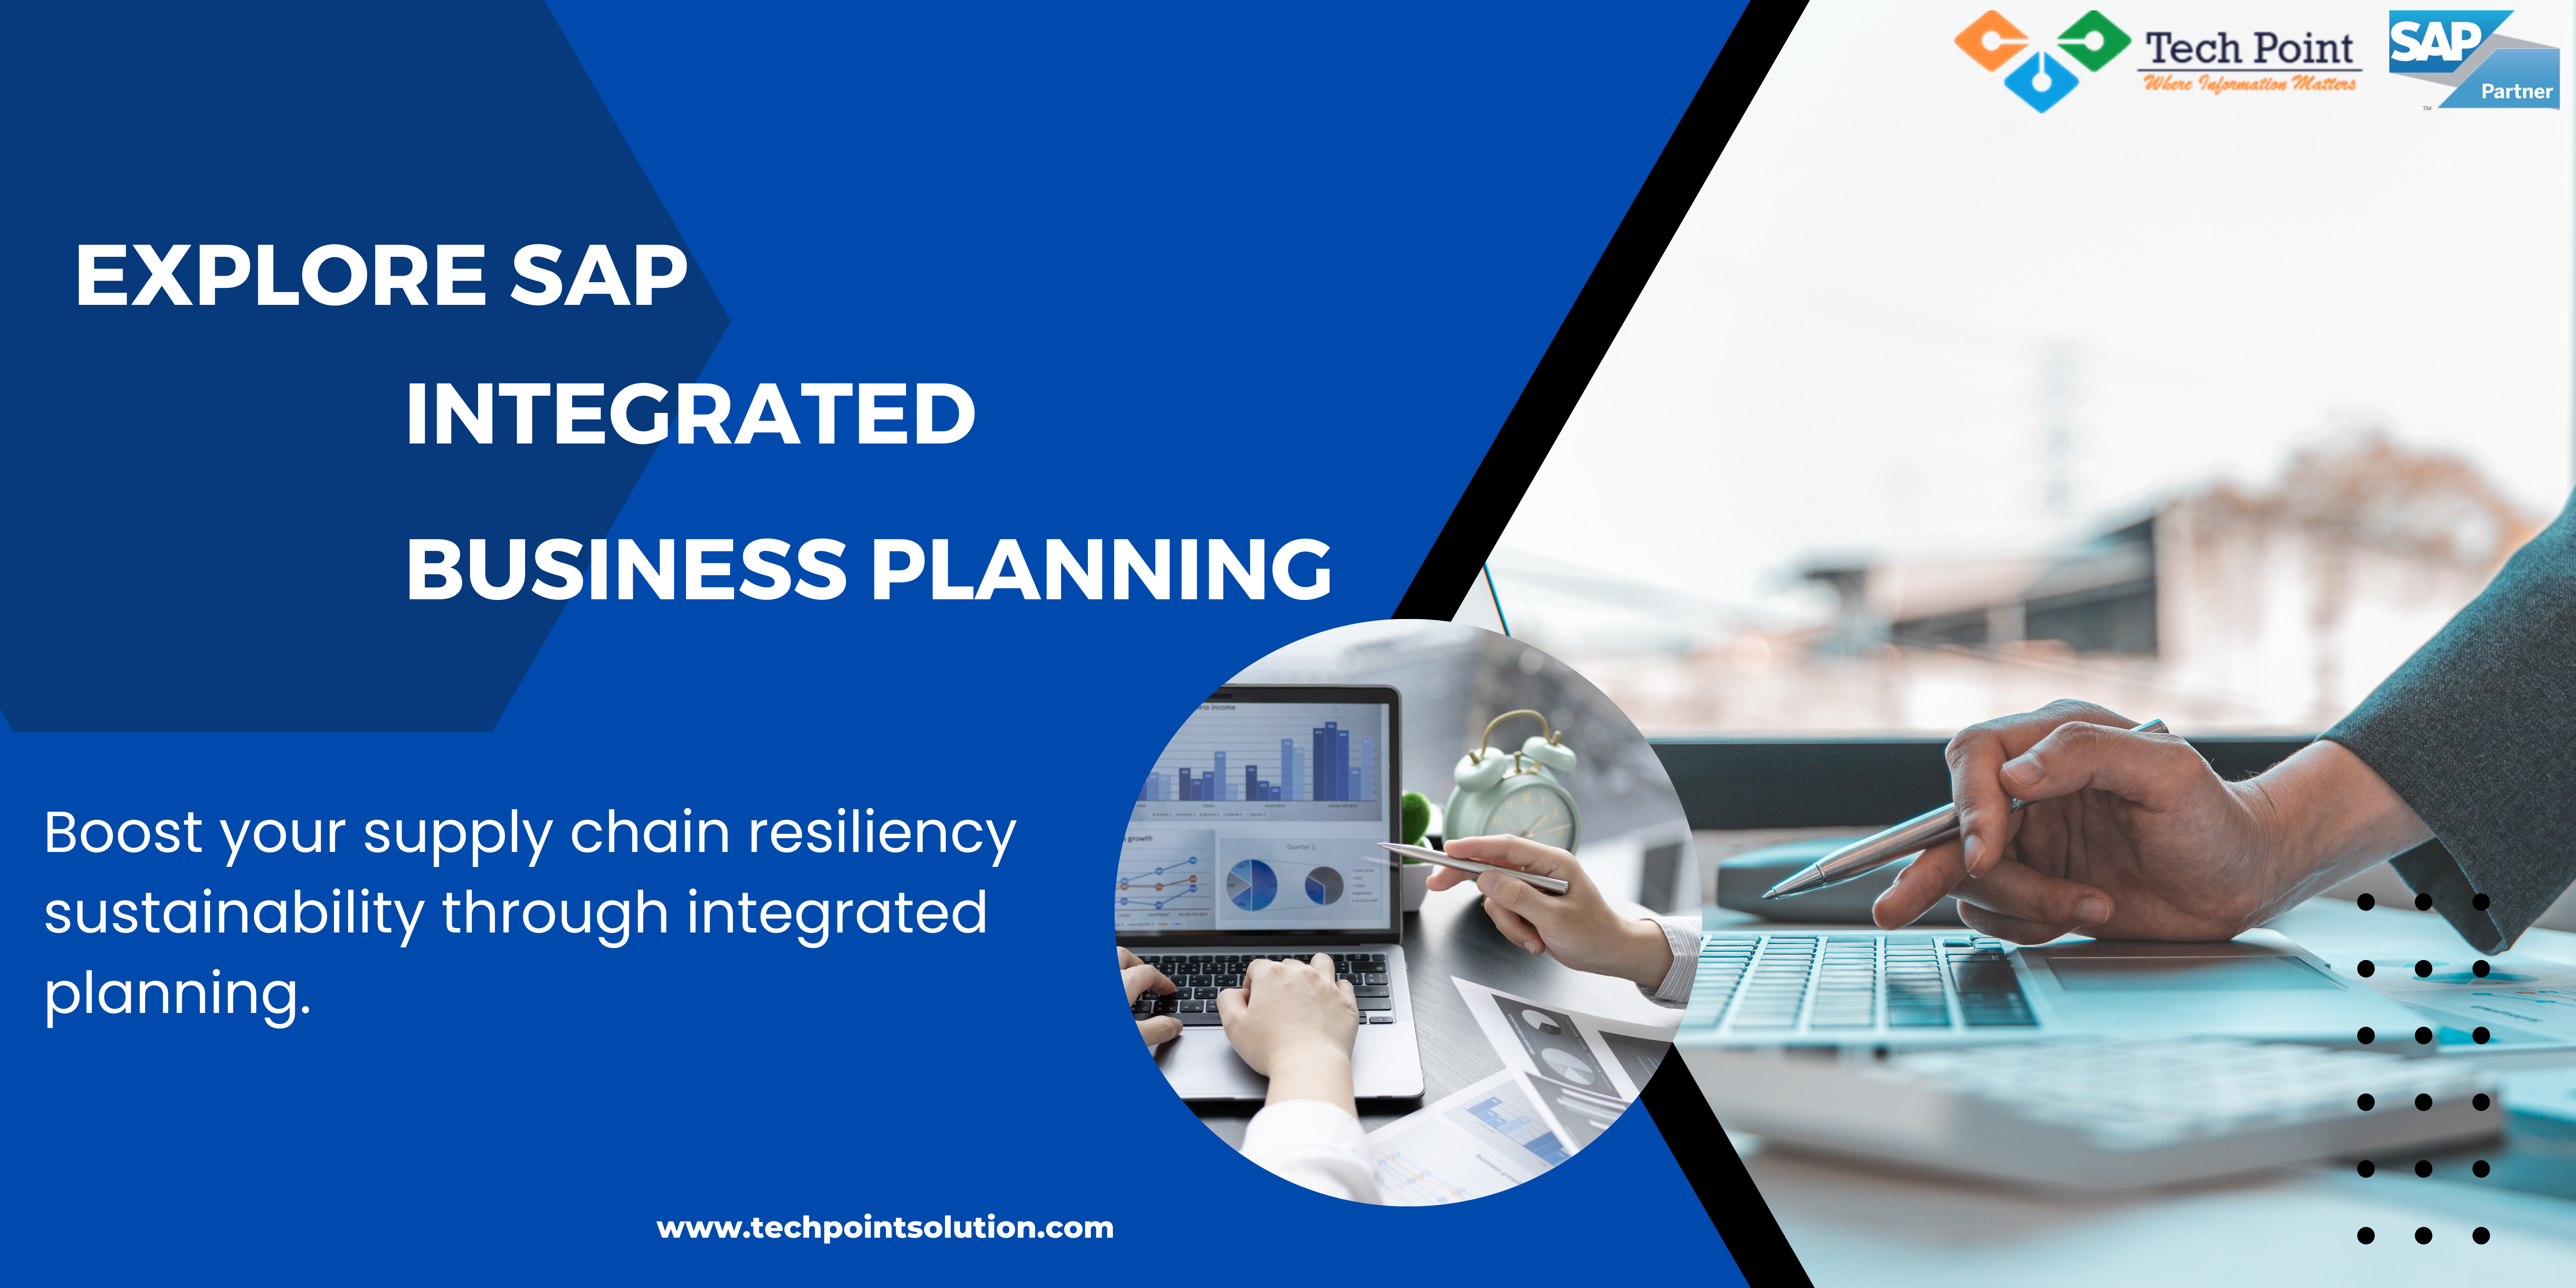 EXPLORE SAP INTEGRATED BUSINESS PLANNING FOR SUPPLY CHAIN